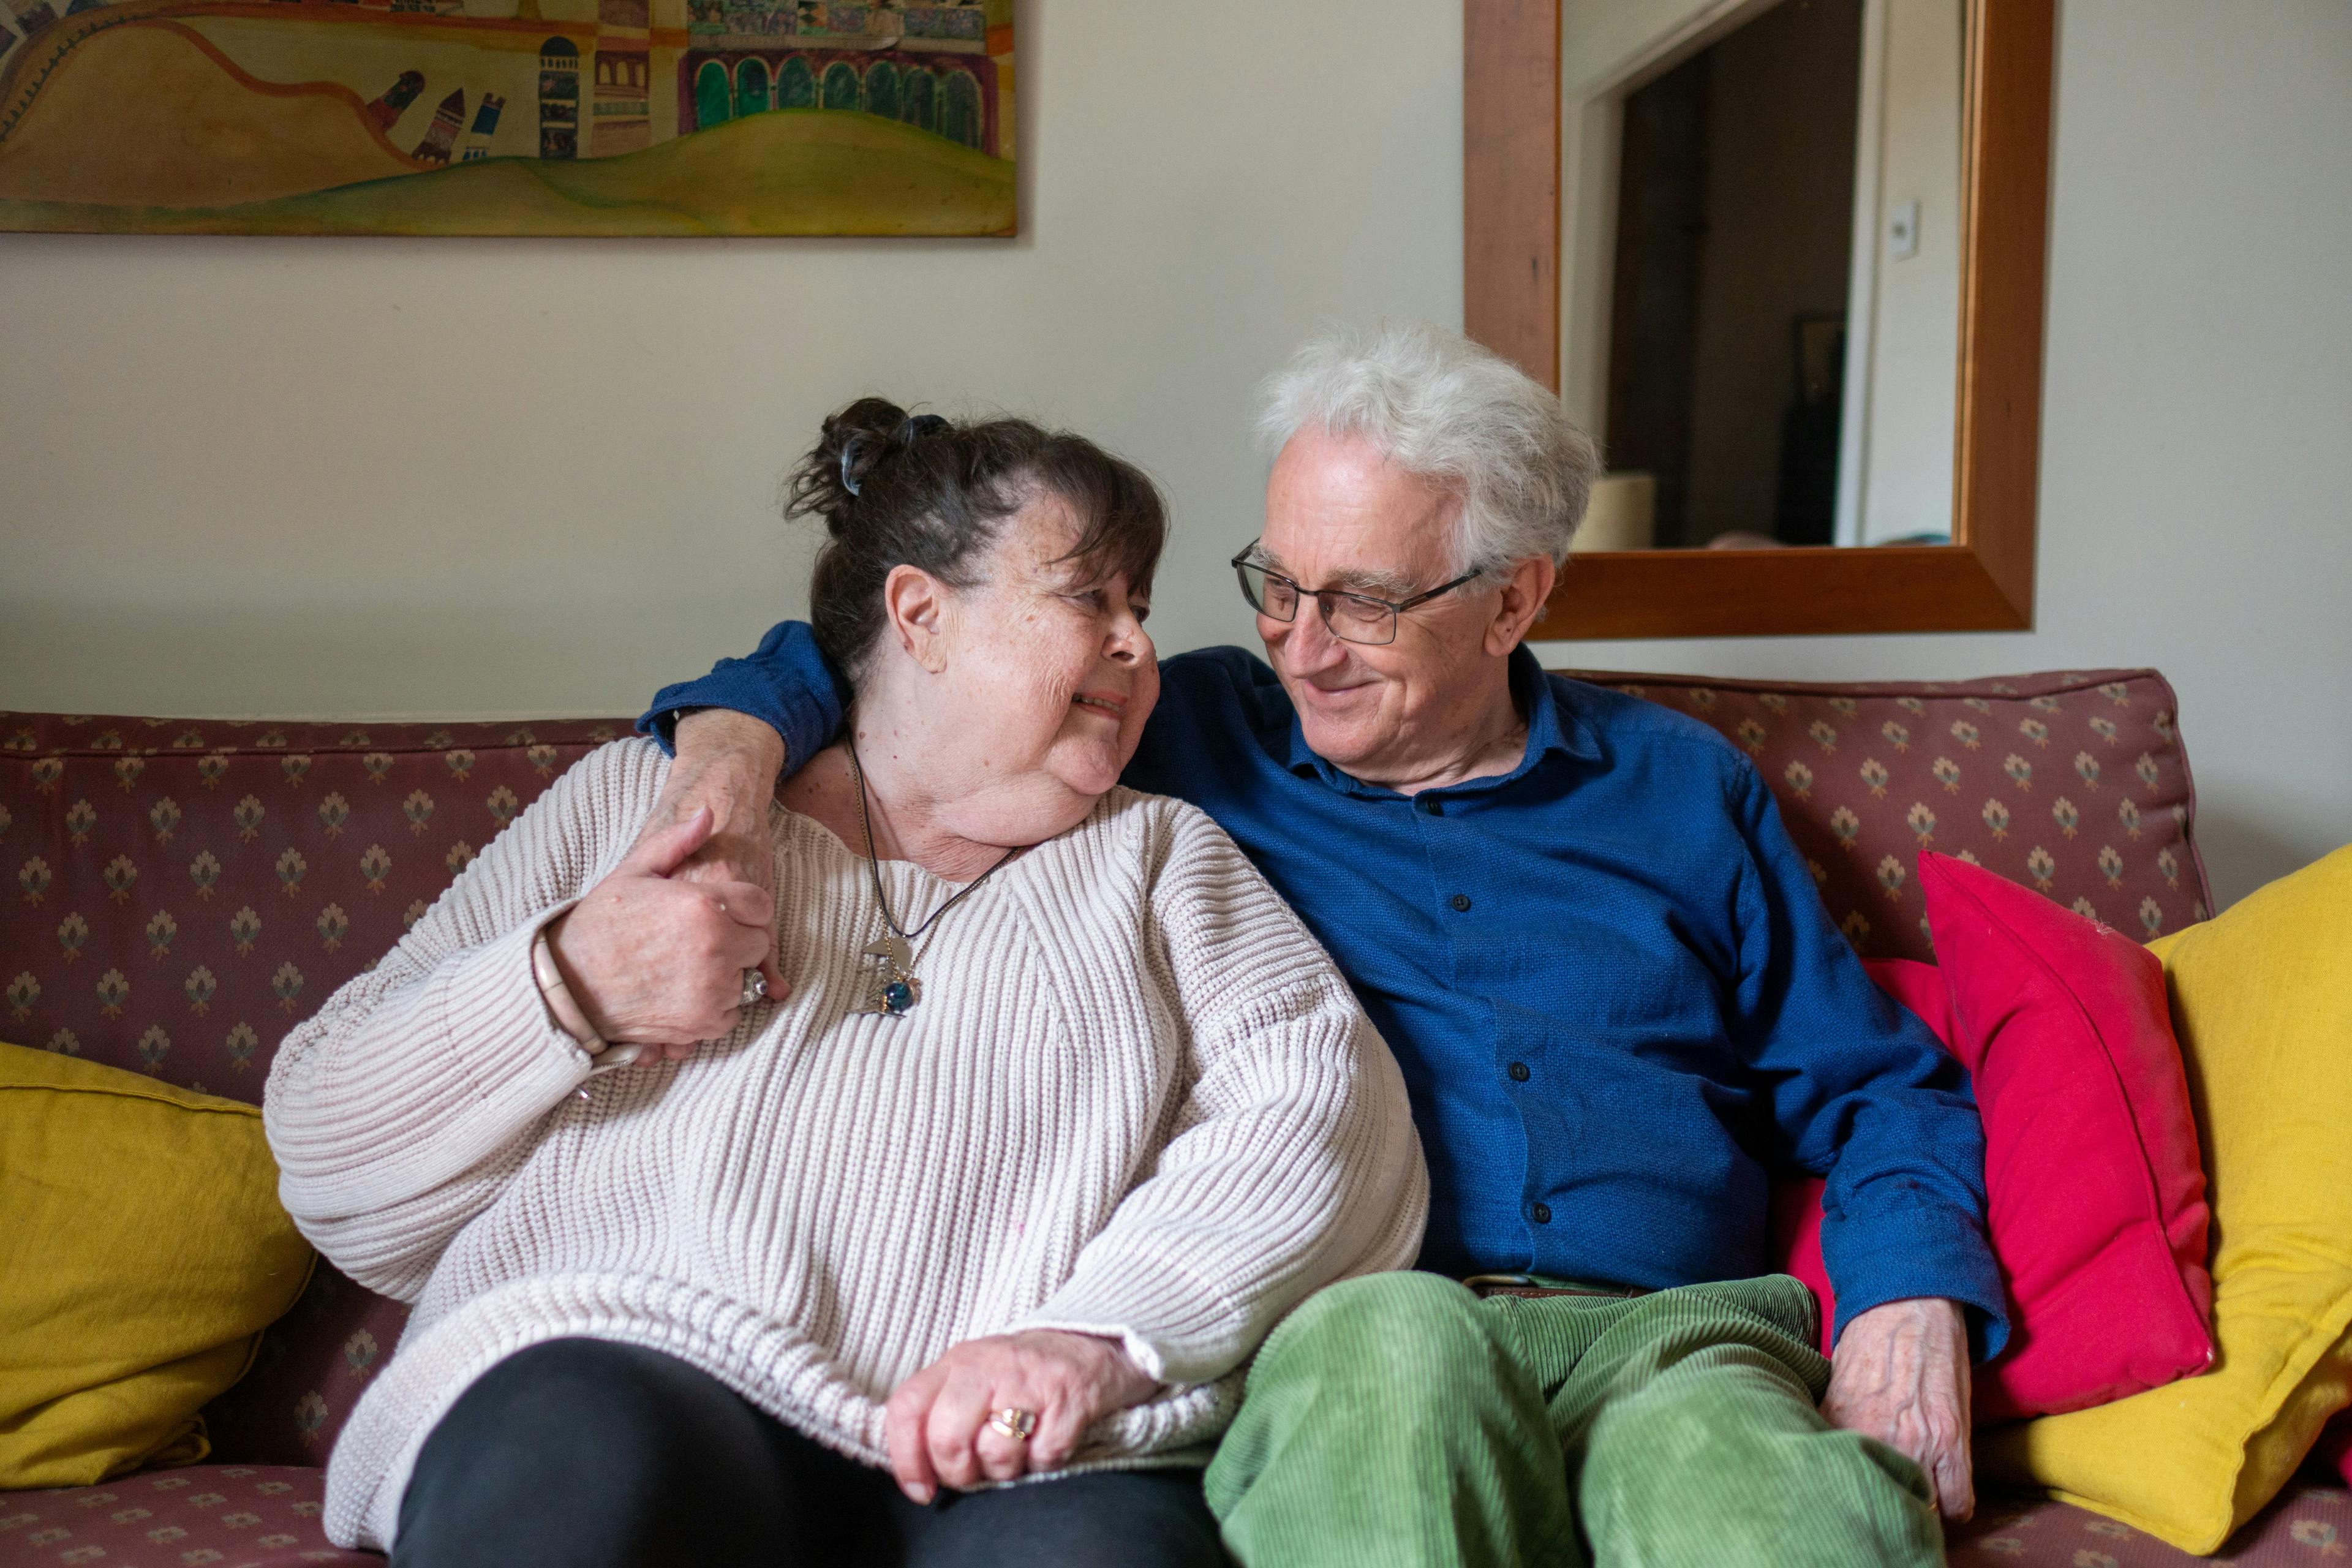 What is convalescent care and what is a convalescent care home?